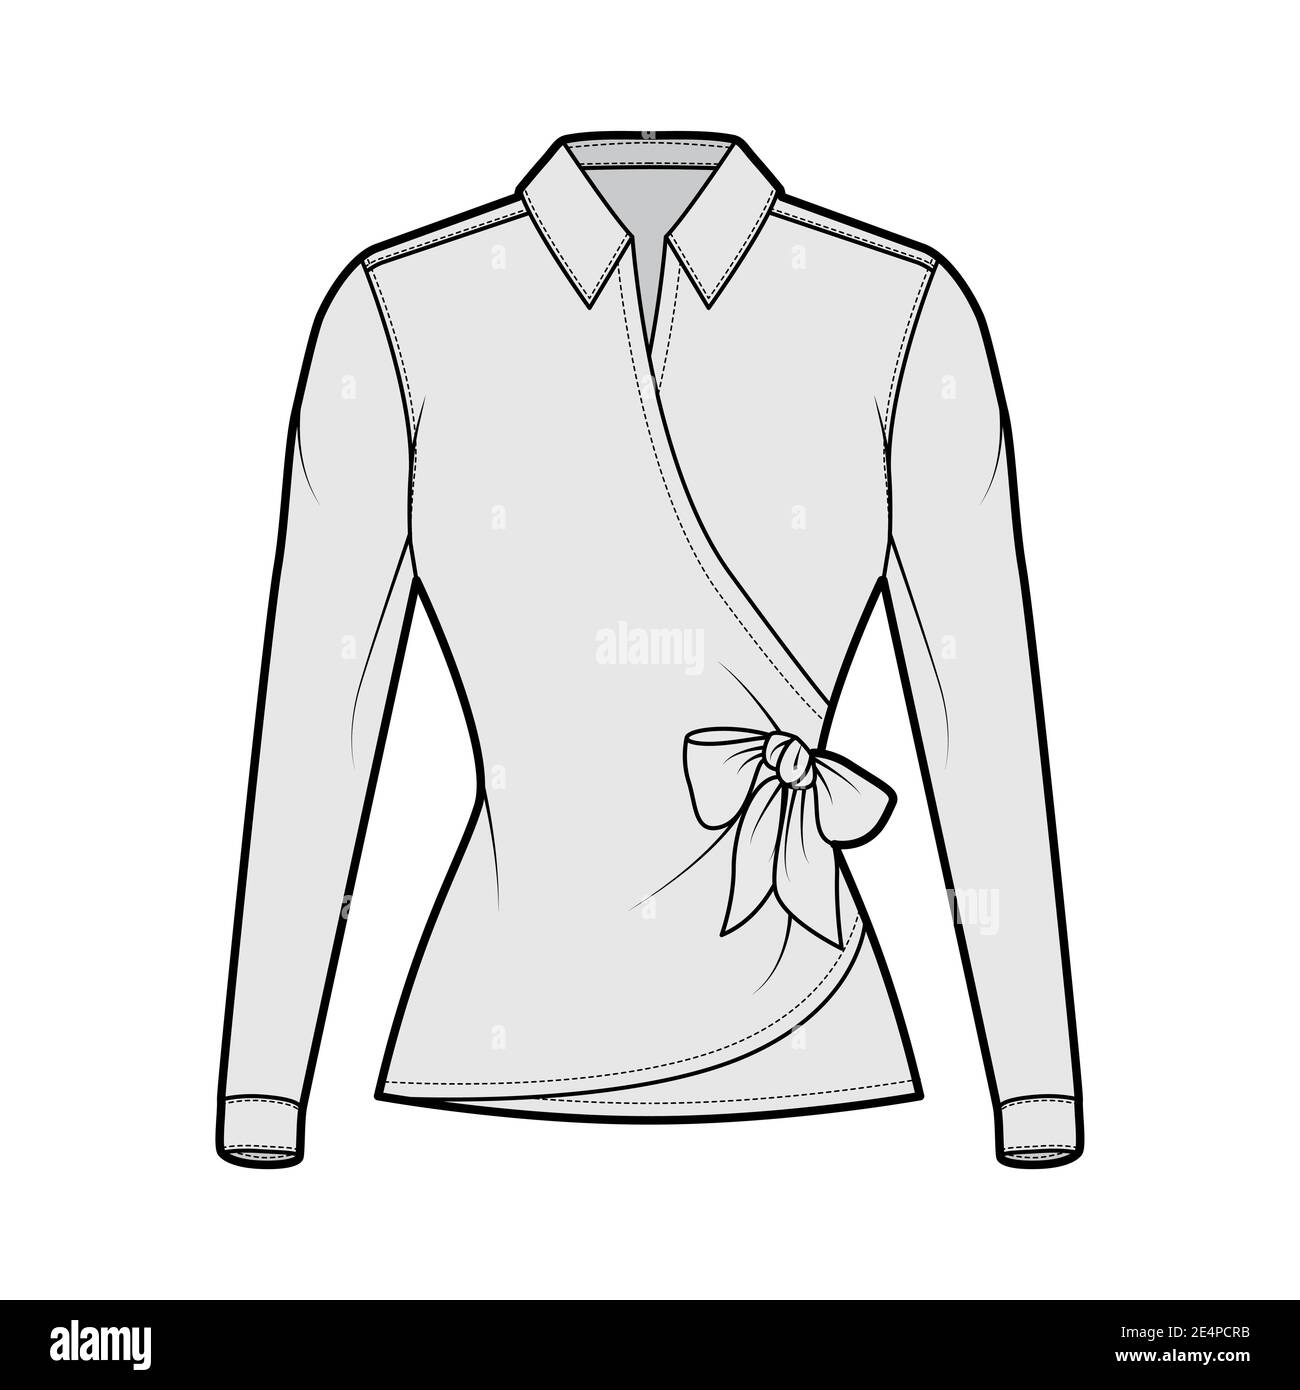 Shirt wrap technical fashion illustration with bow tie closure, long ...